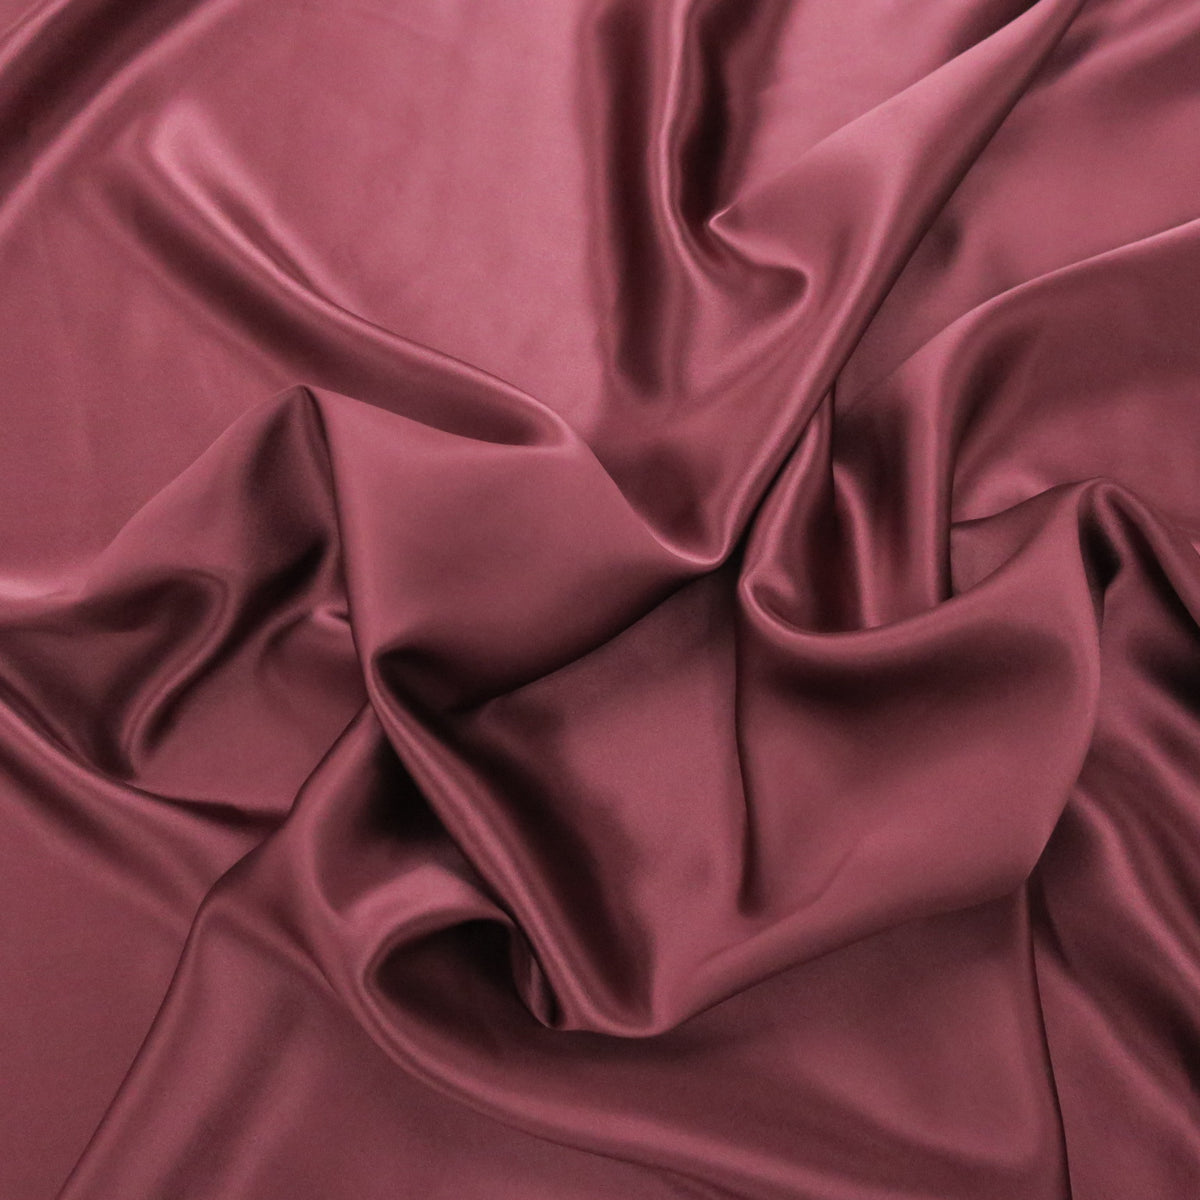 Solid Red 100% Pure Silk Charmeuse Fabric for Sewing 